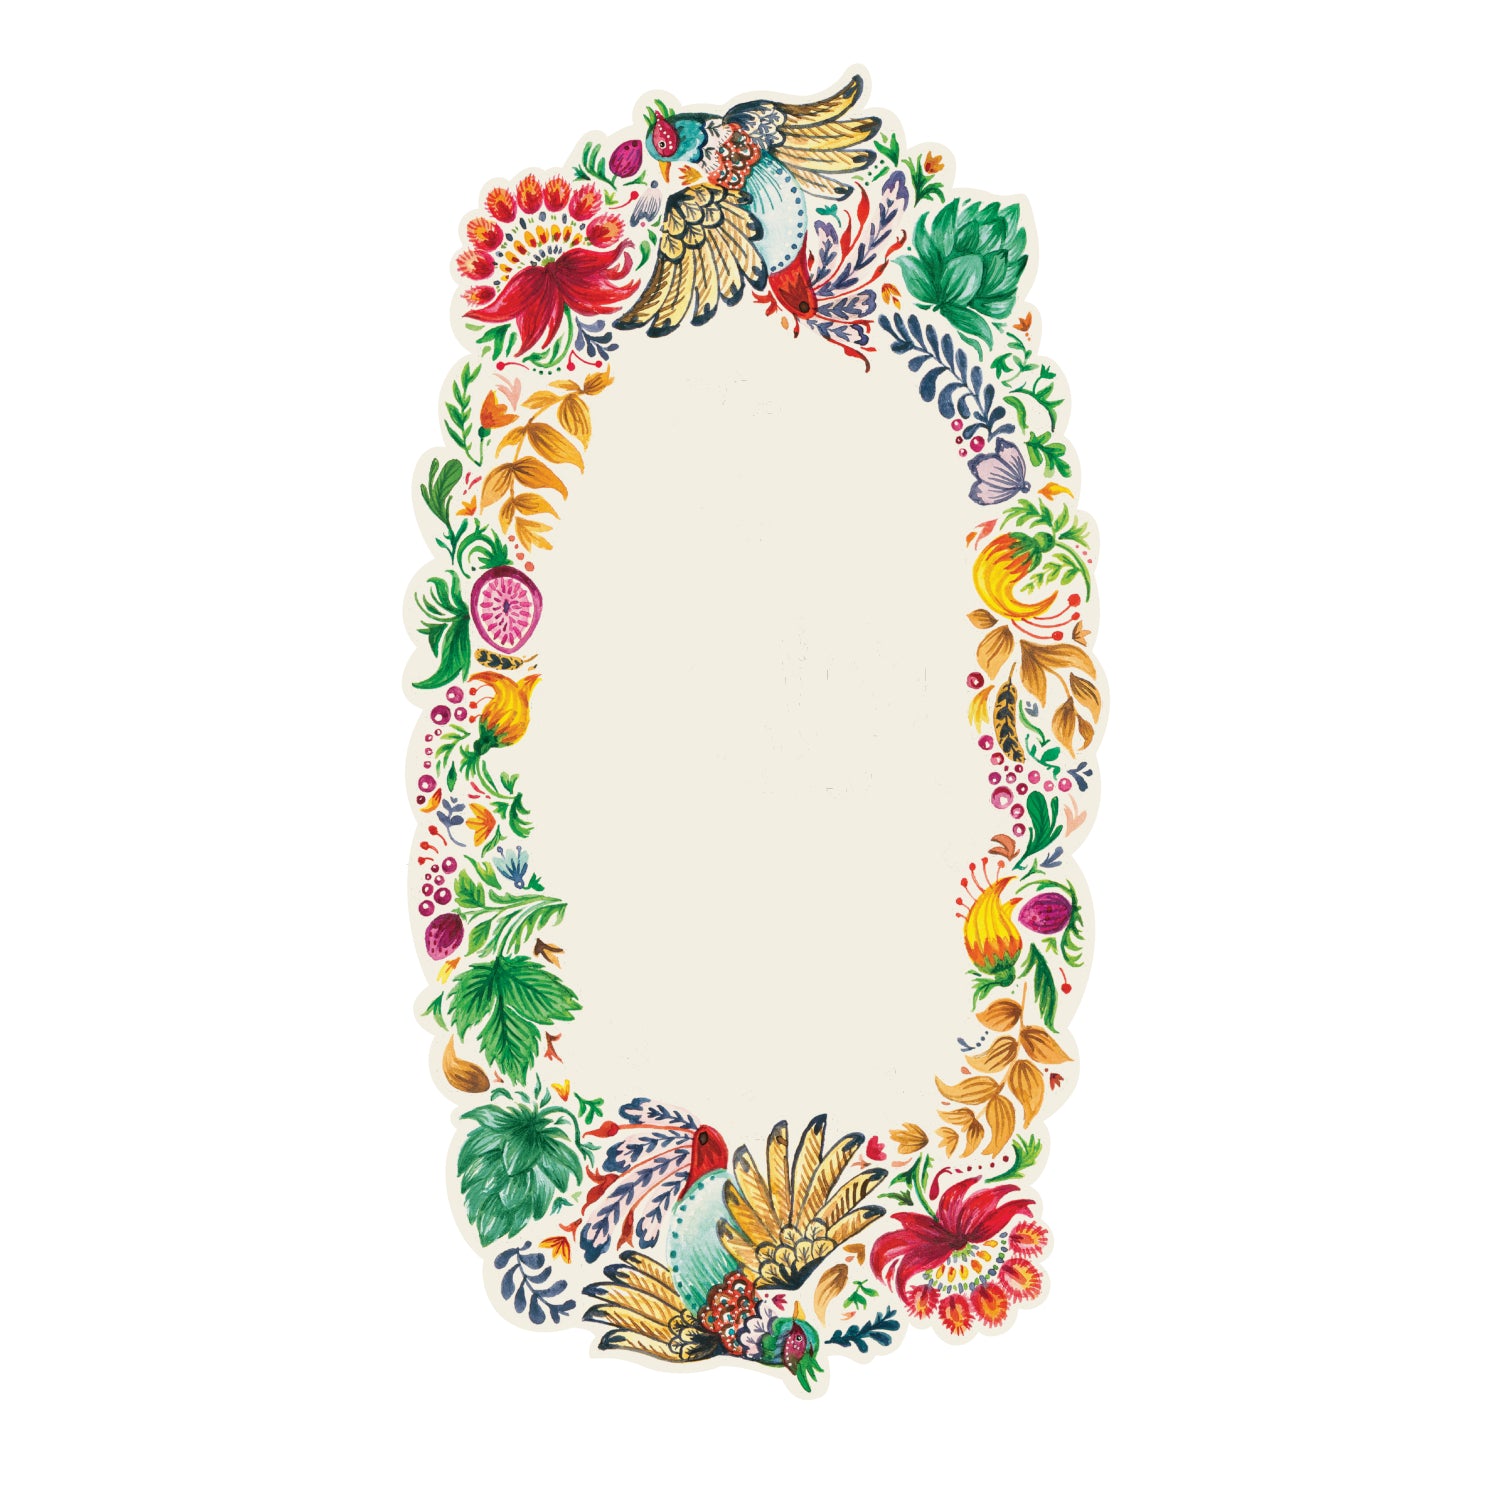 A hand-painted colorful floral design on a white Bountiful Frame Table Accent by Hester &amp; Cook.